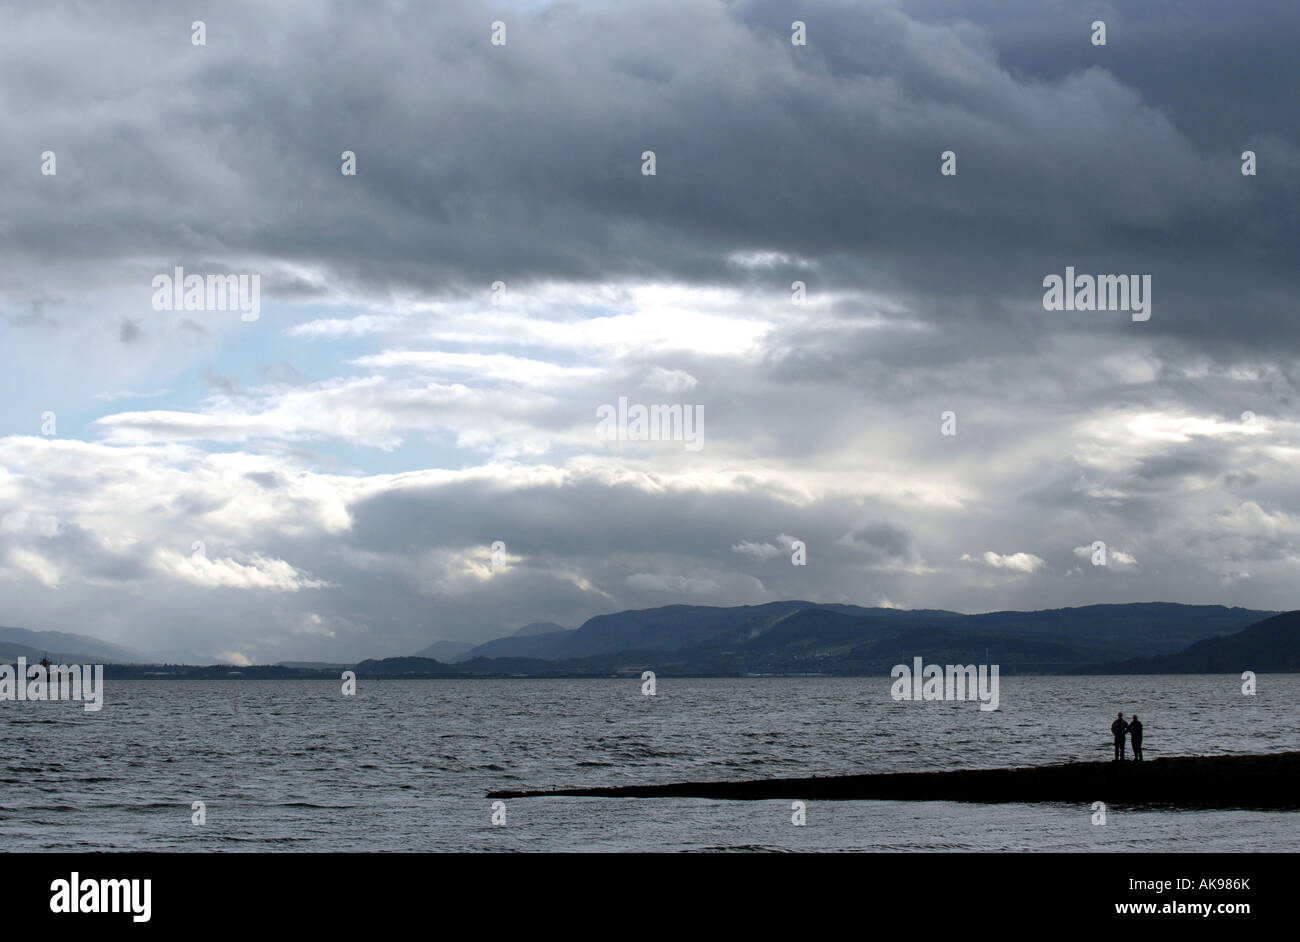 A COUPLE LOOK OUT TOWARDS CLOUDY SKIES OVER INVERNESS FROM THE JETTY AT CHANONRY POINT IN THE MORAY FIRTH,NORTH EAST SCOTLAND,UK Stock Photo